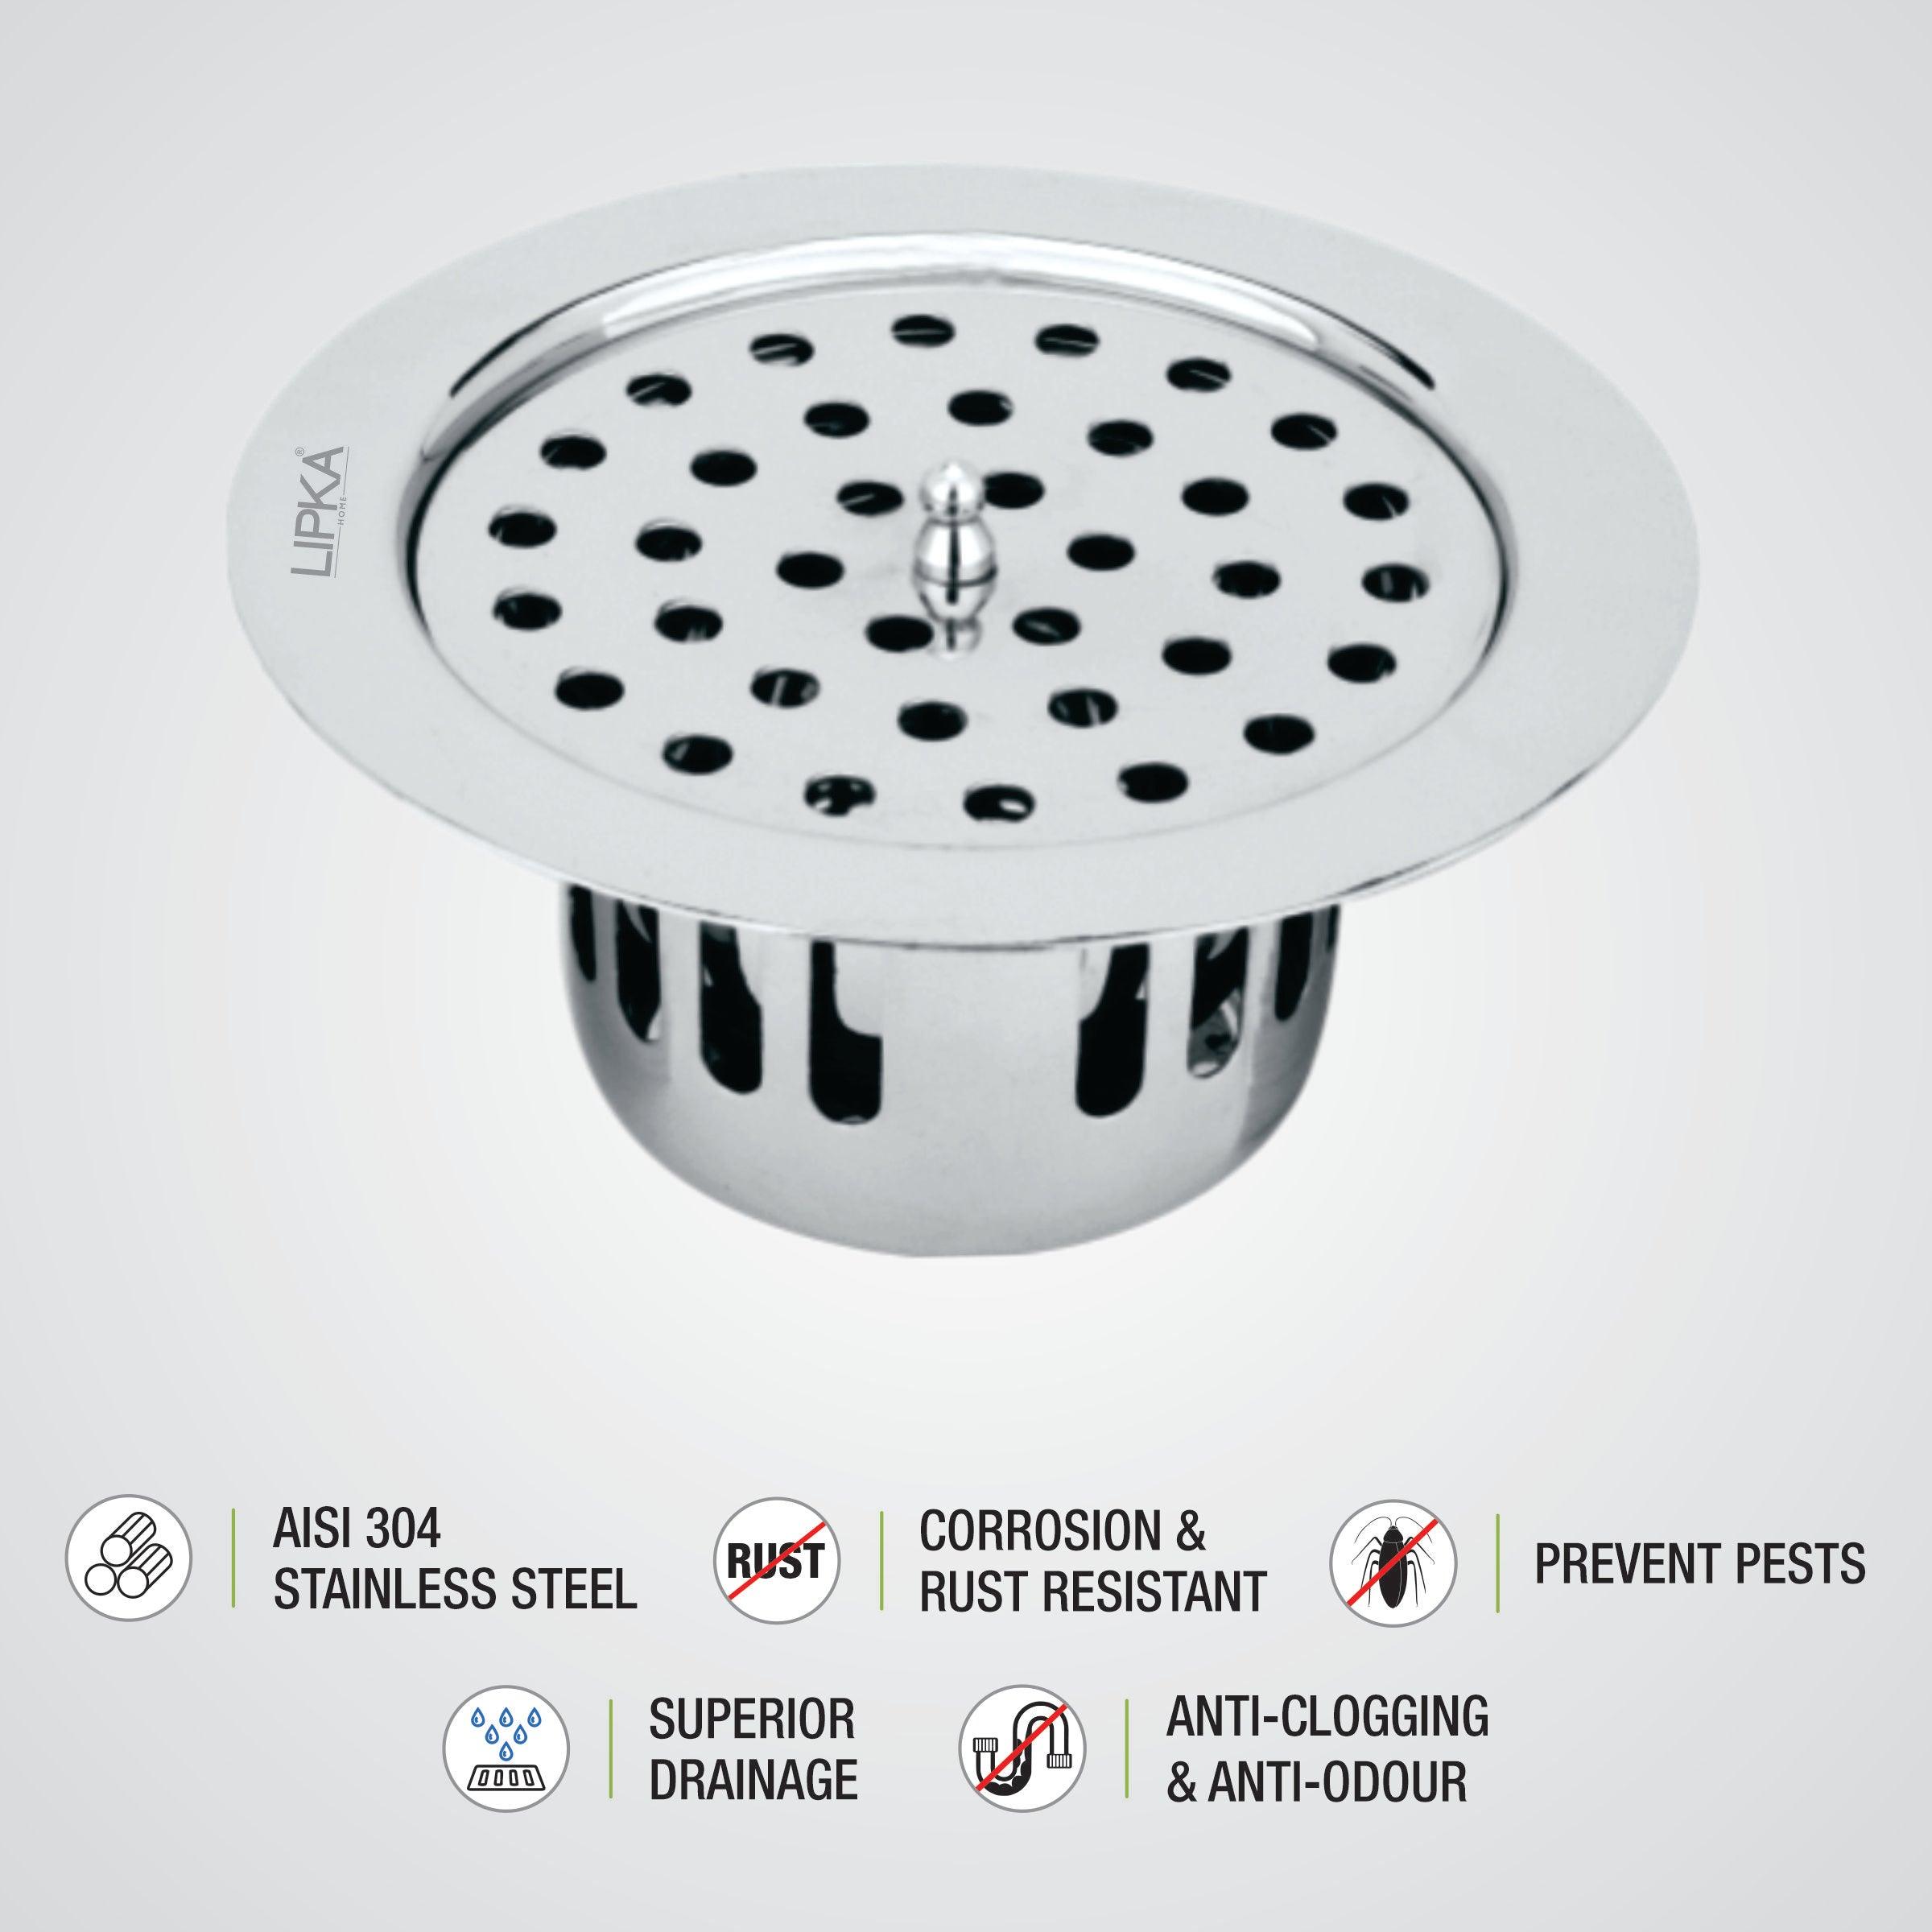 Round Flat Cut Floor Drain (5.5 inches) with Cockroach Trap & Lid features